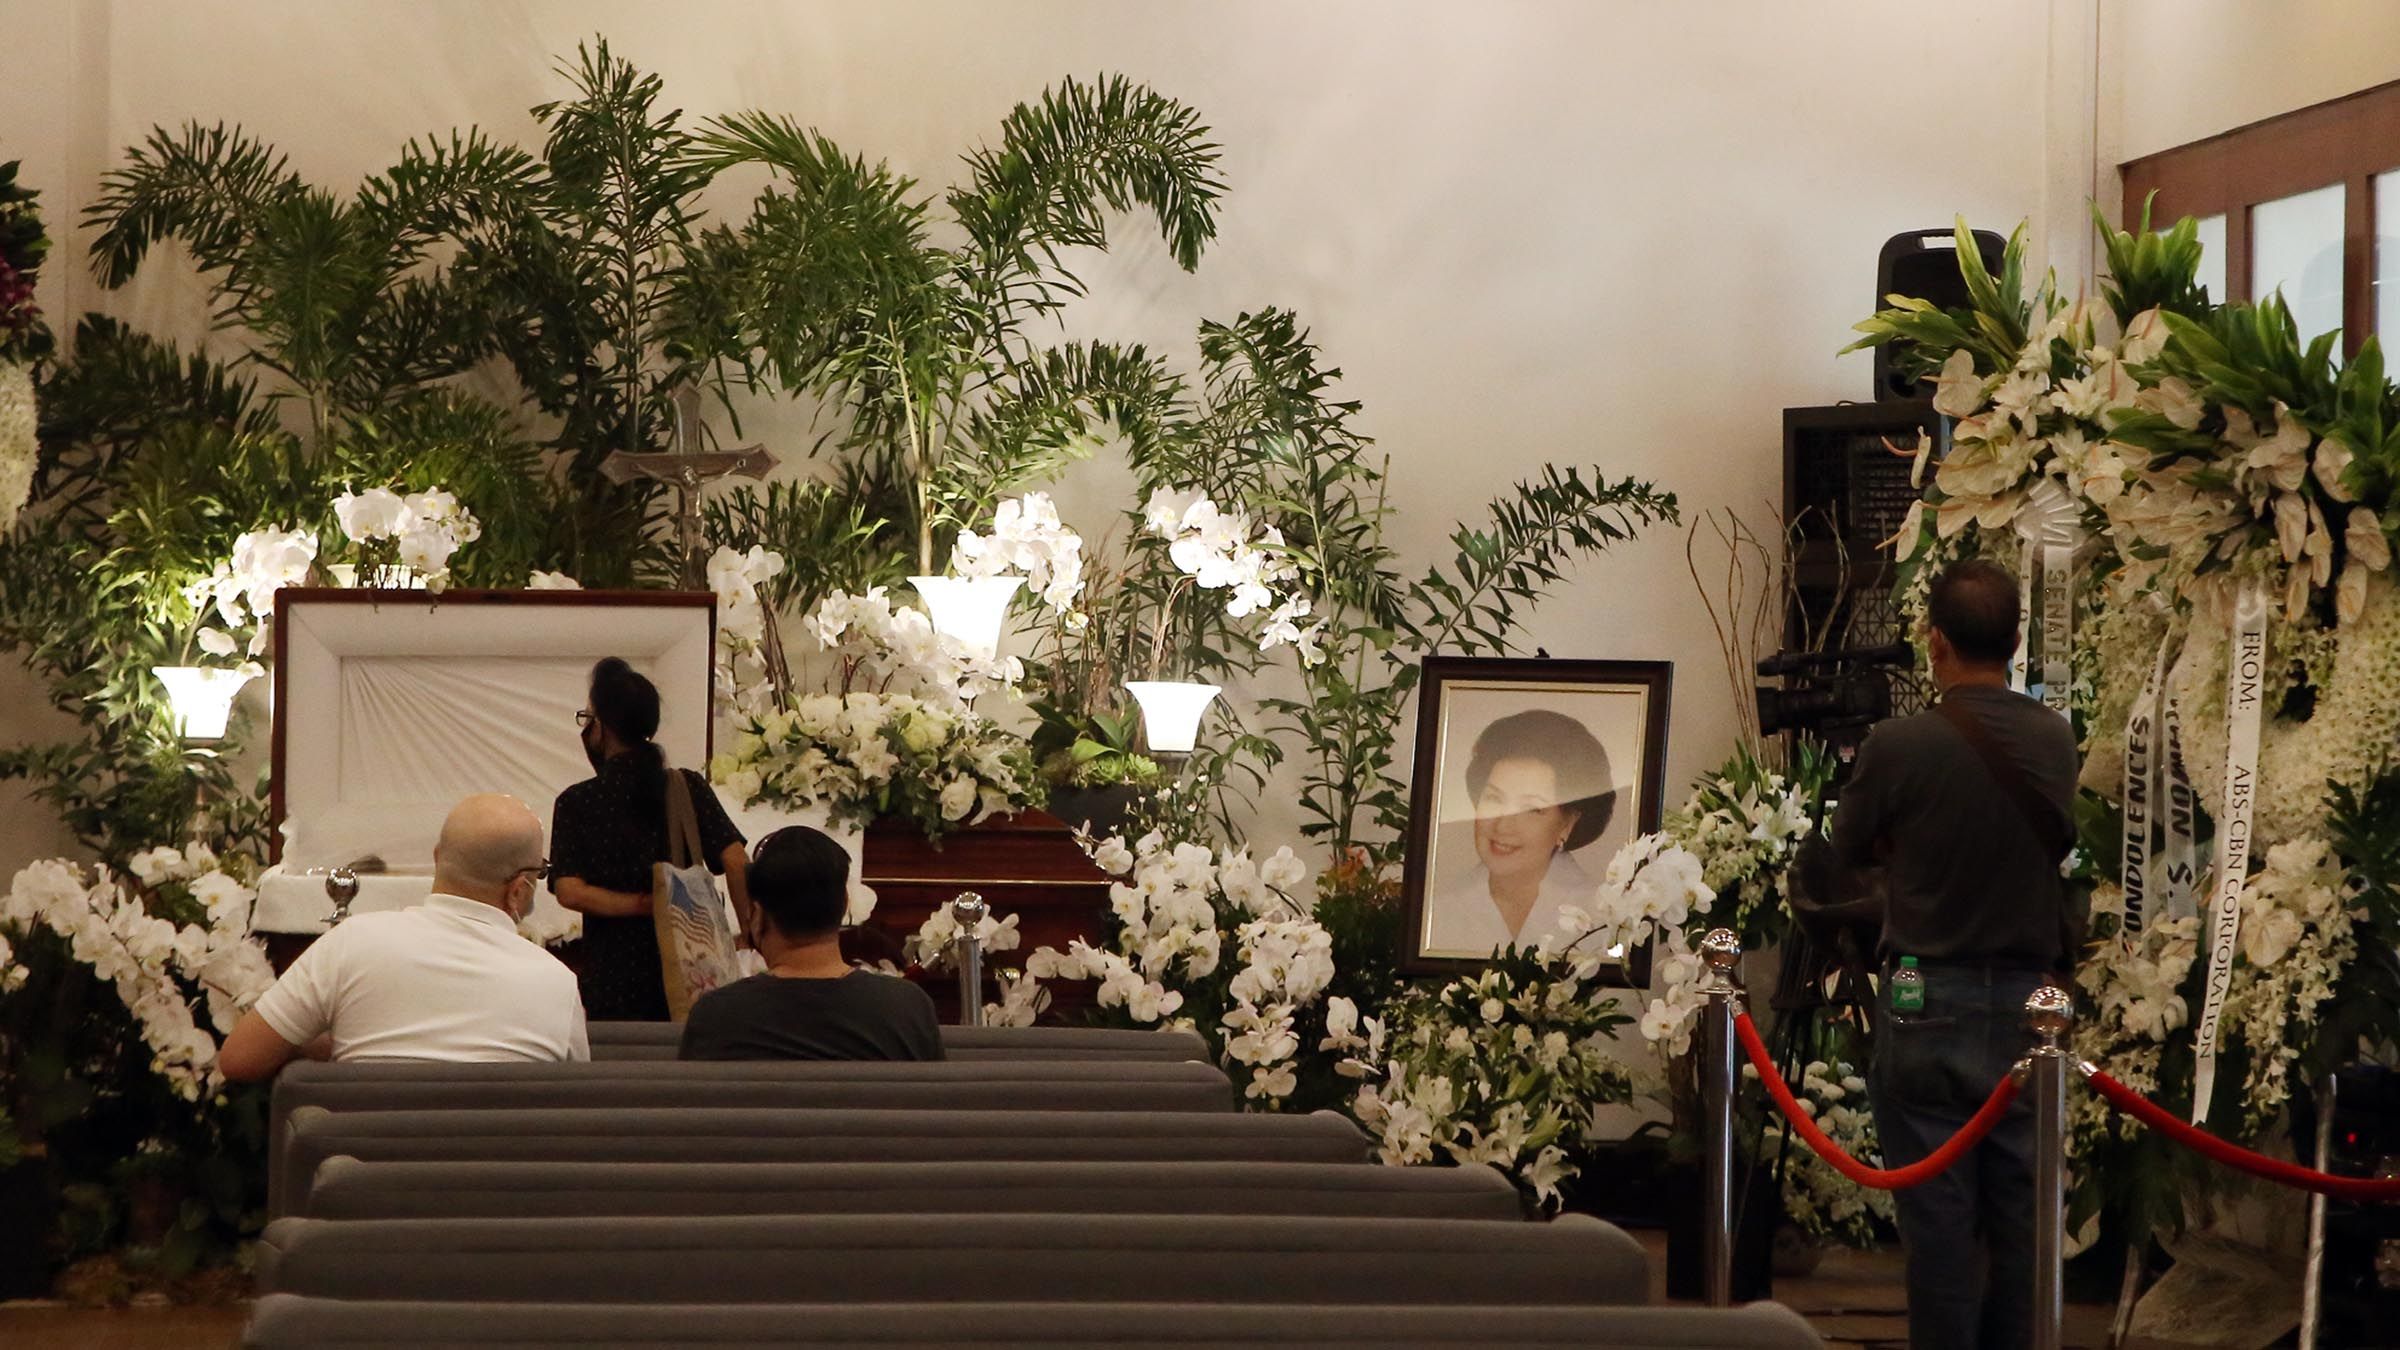 1ST DAY OF WAKE OF SUSAN ROCES photo Mike Taboy